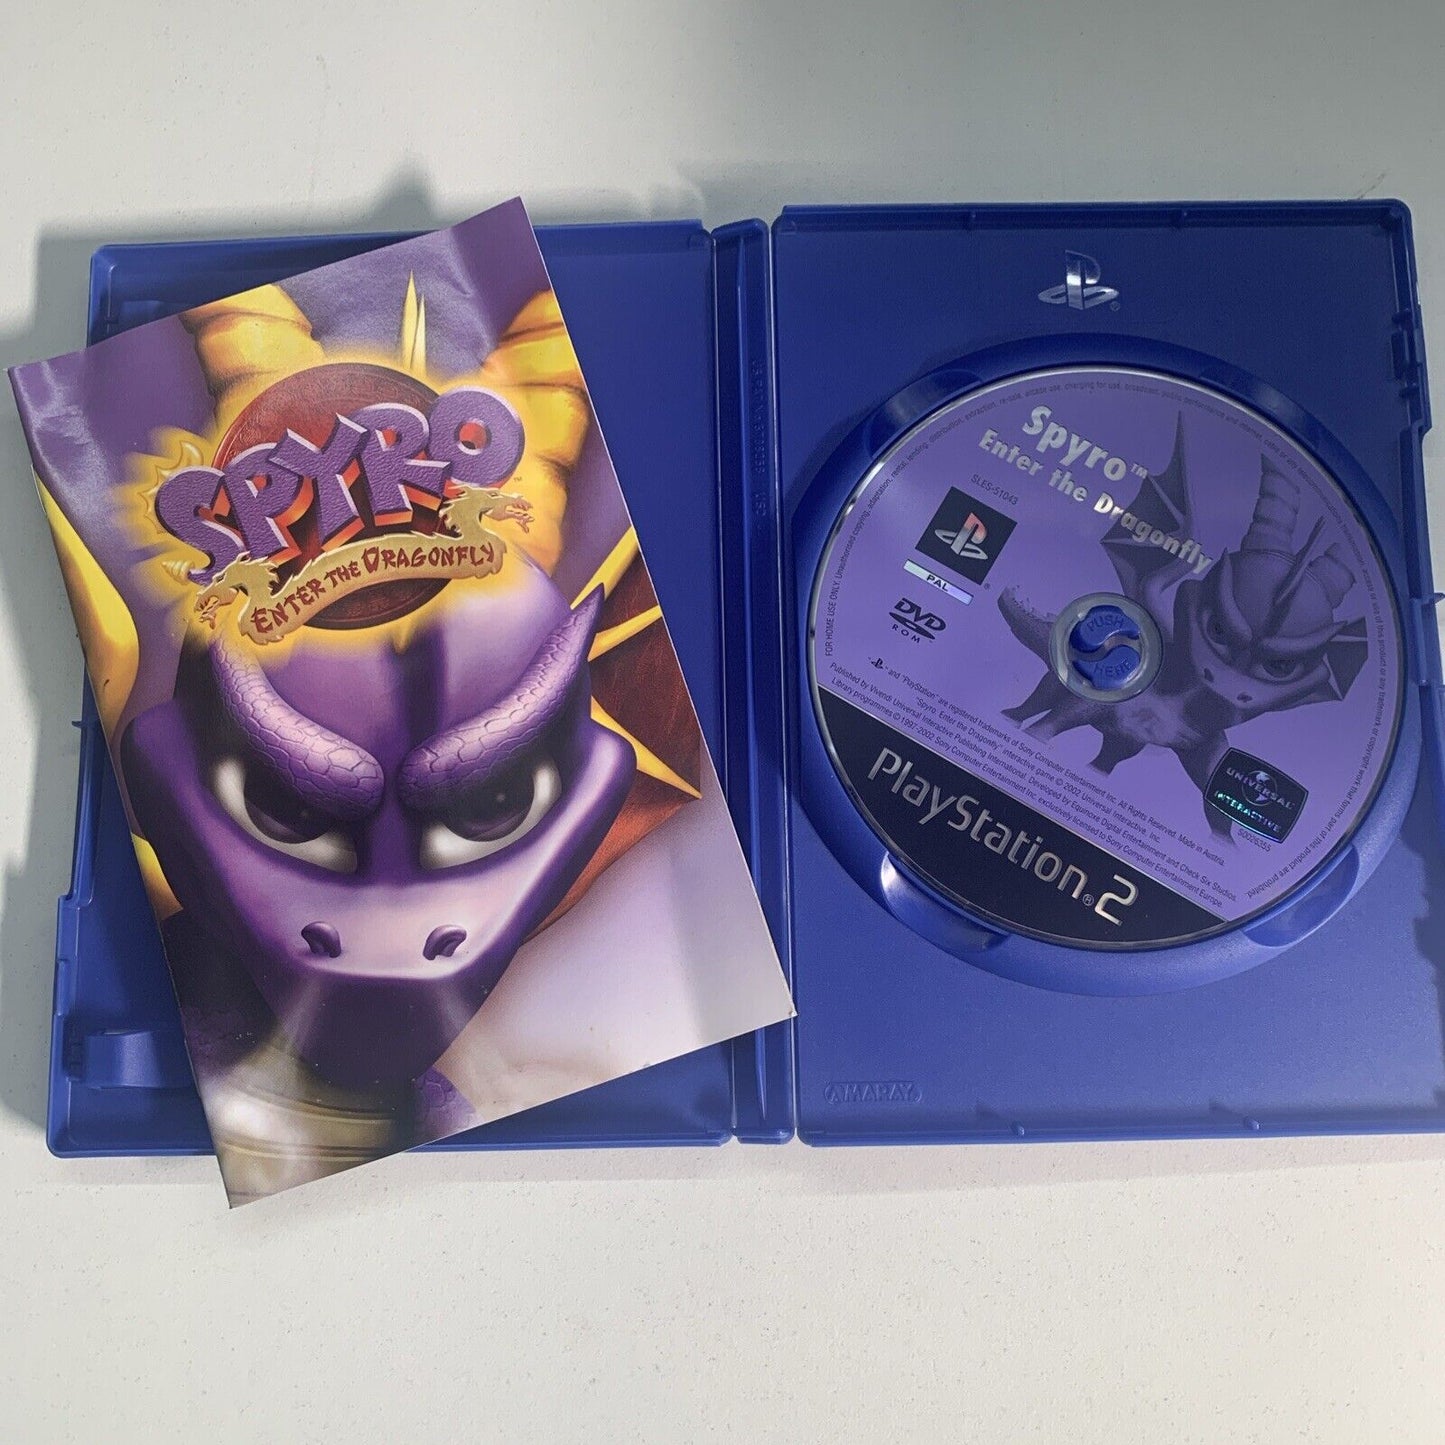 Spyro Enter the Dragonfly PlayStation 2 PS2 Game